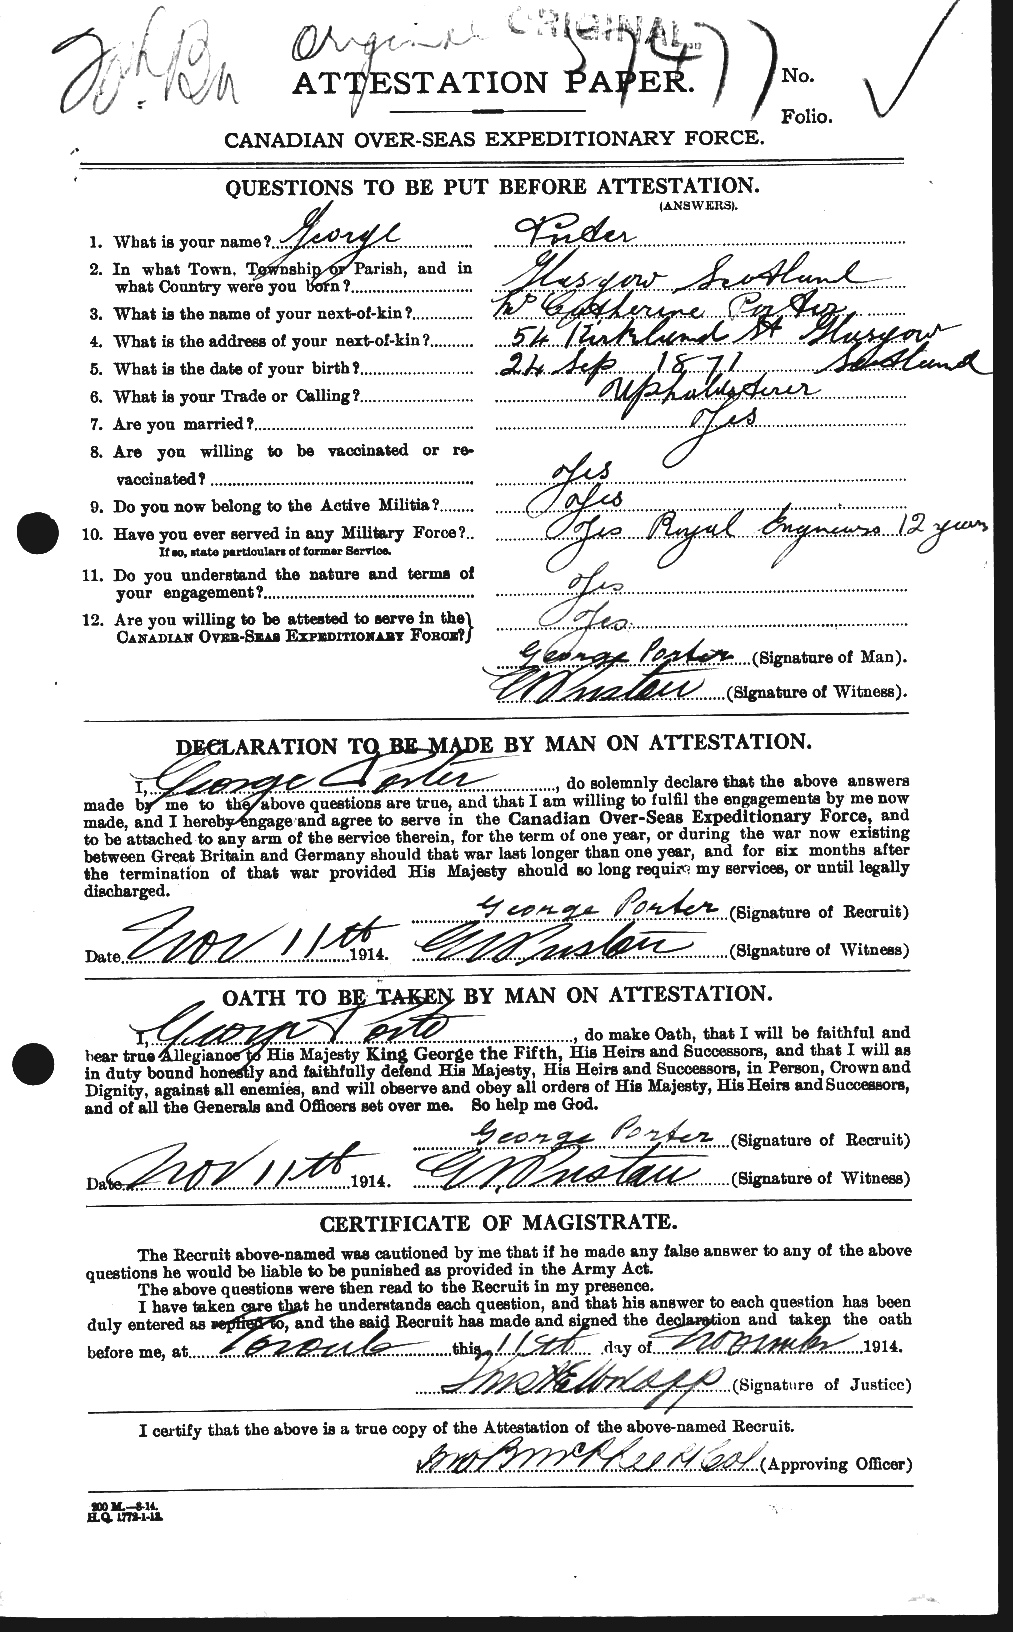 Personnel Records of the First World War - CEF 583588a